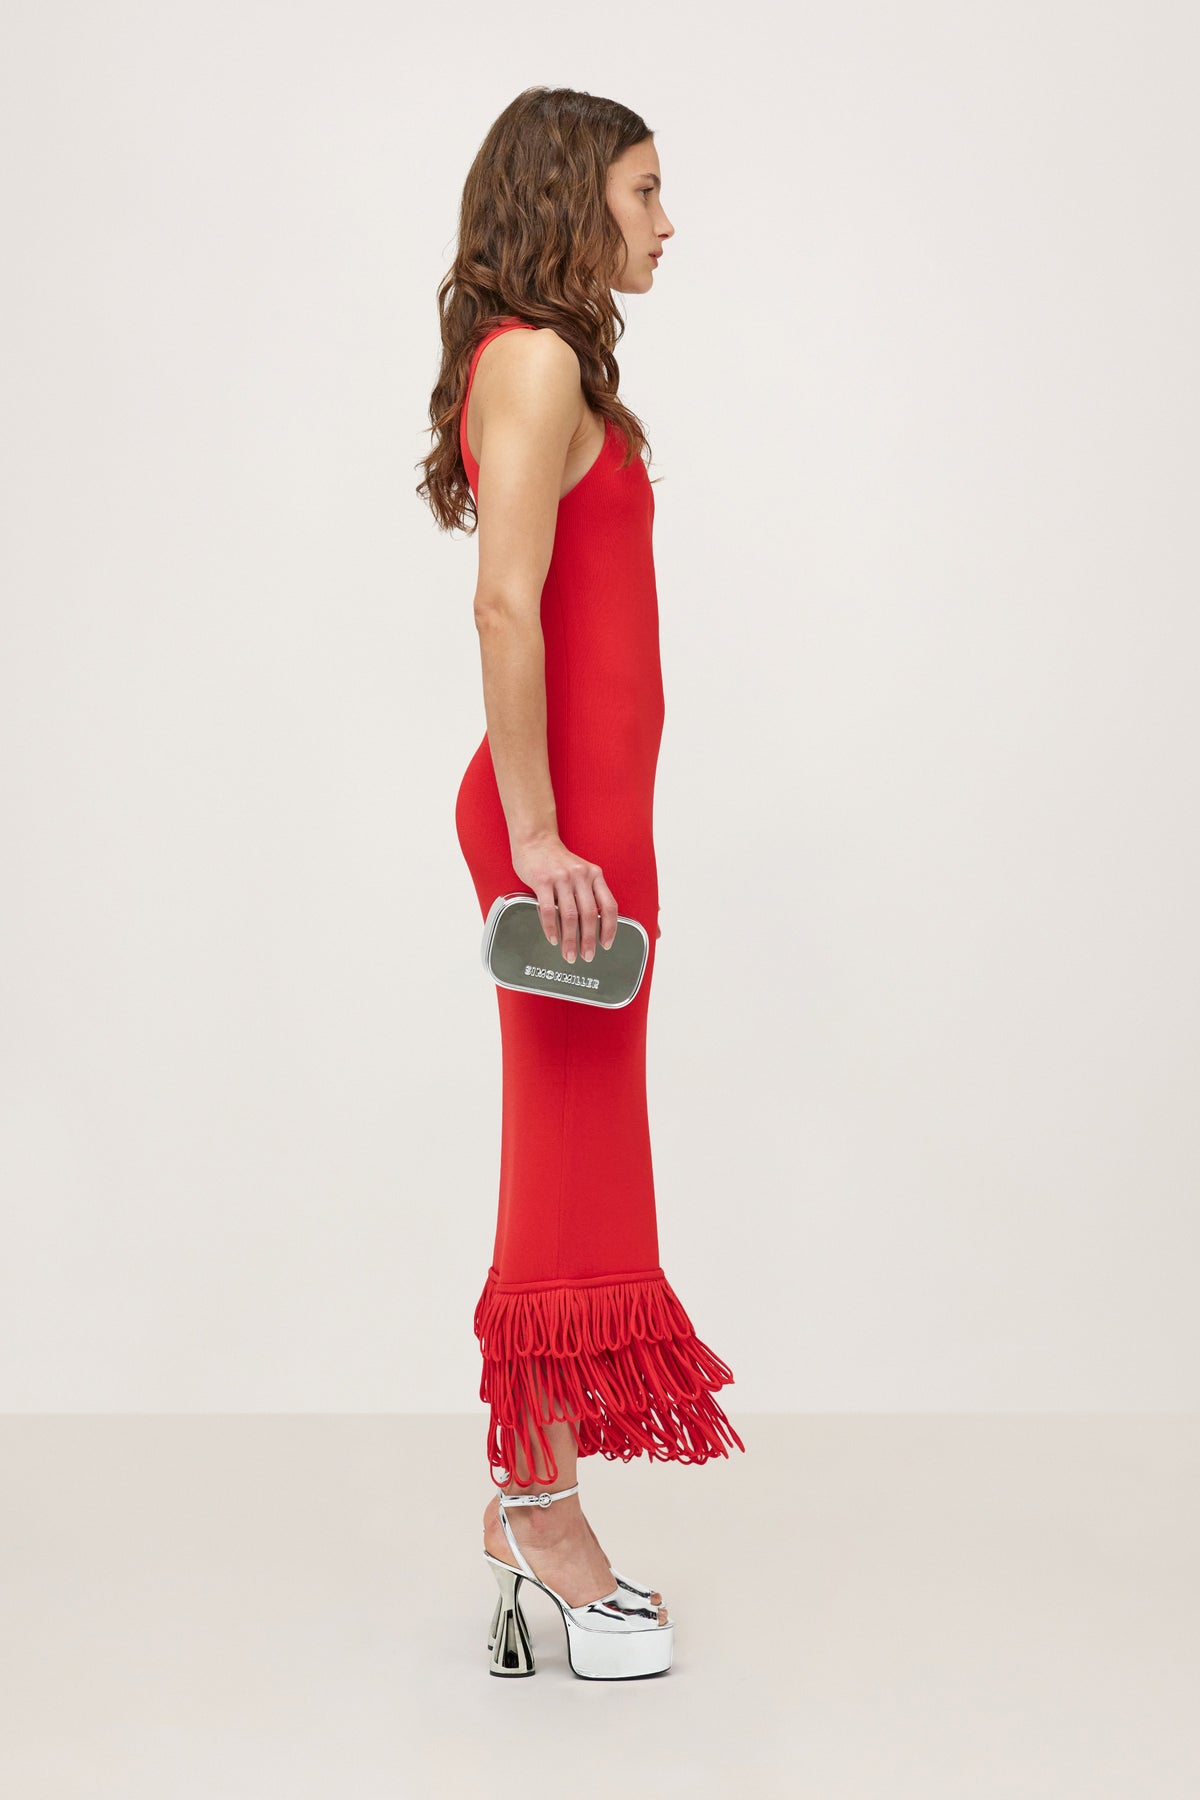 Knits By Albers Dress in Cherry